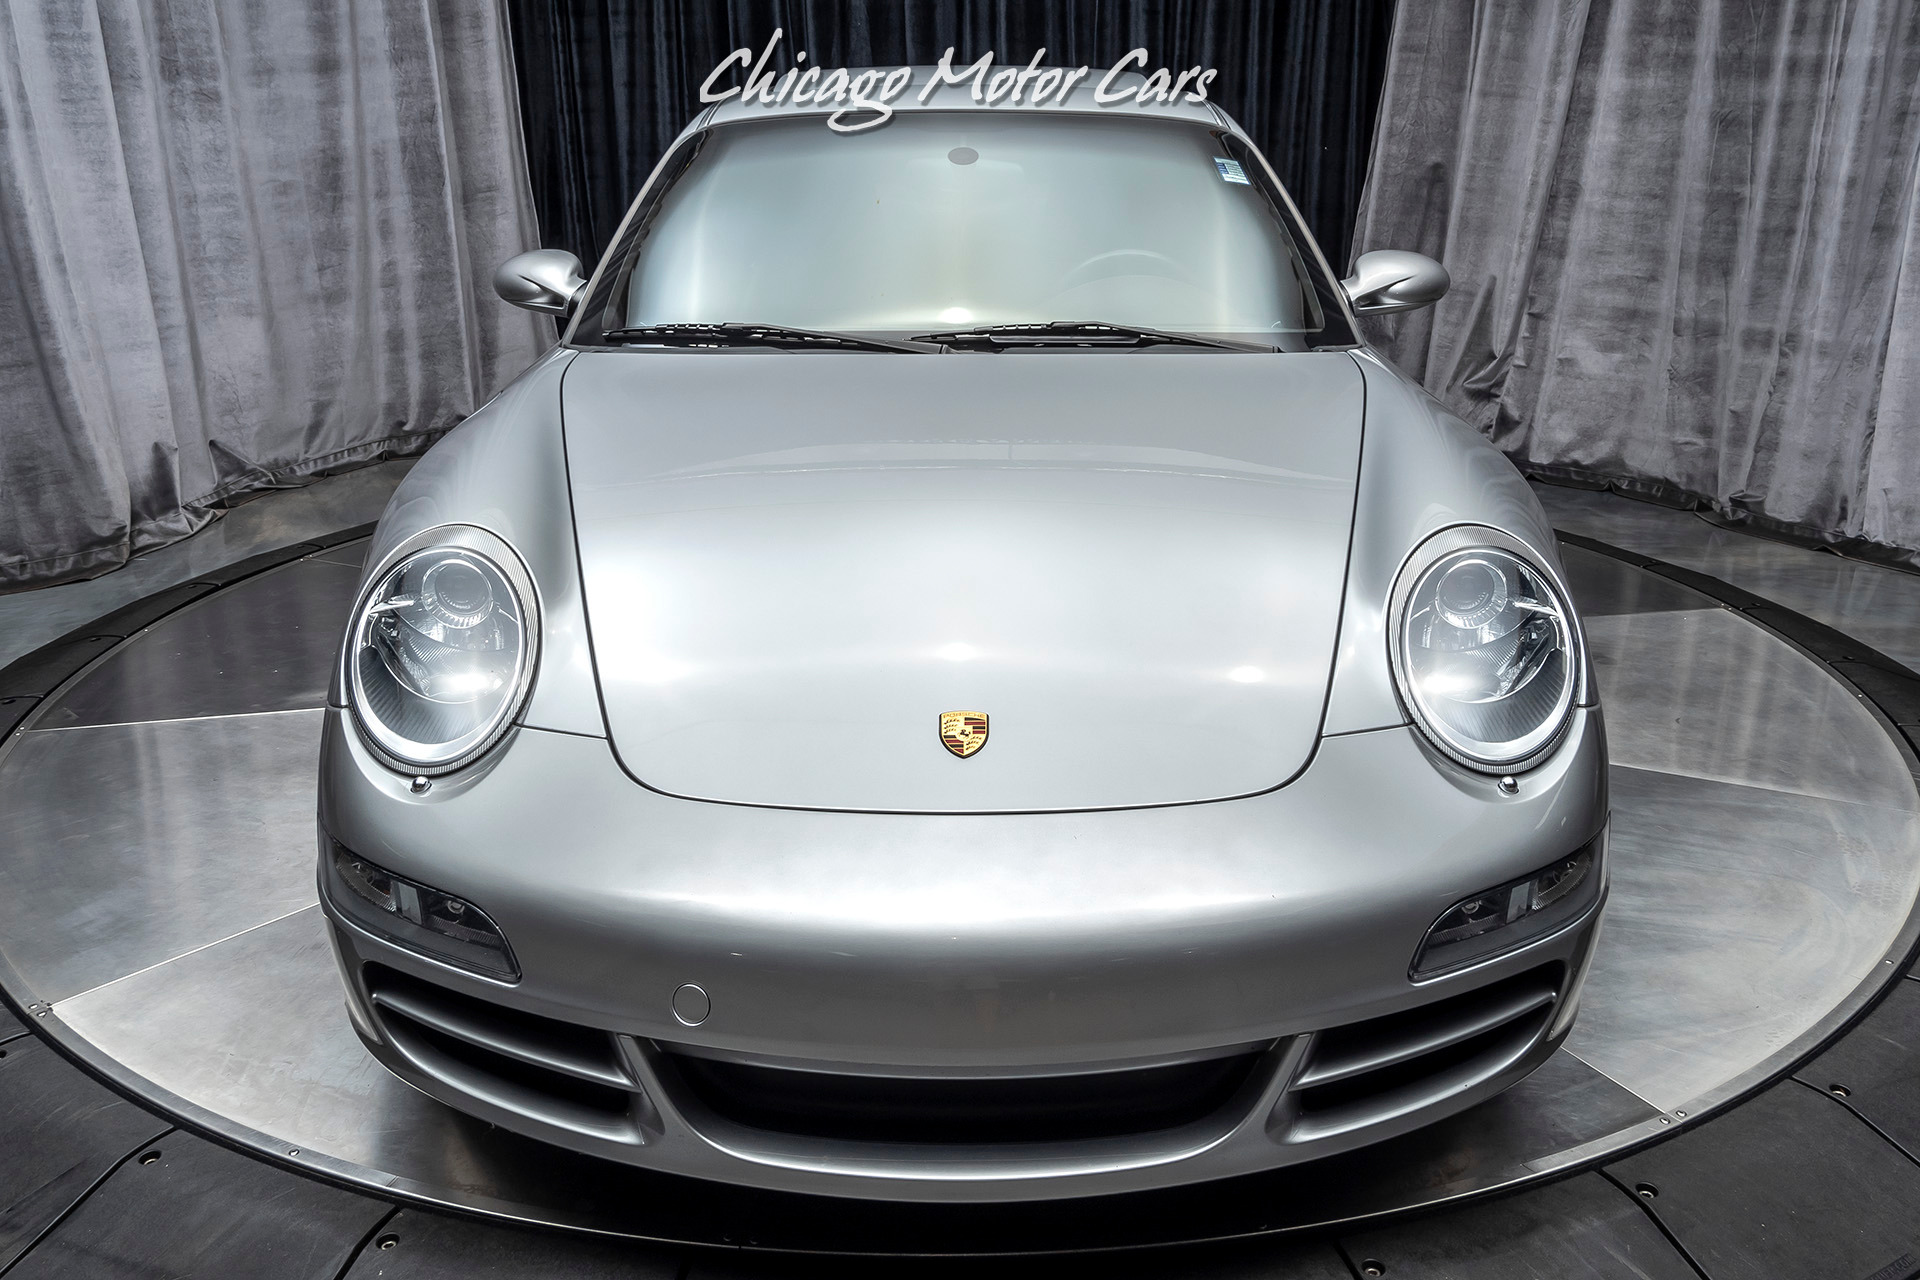 Used-2006-Porsche-911-Carrera-4S-Coupe-MSRP-106790-Serviced